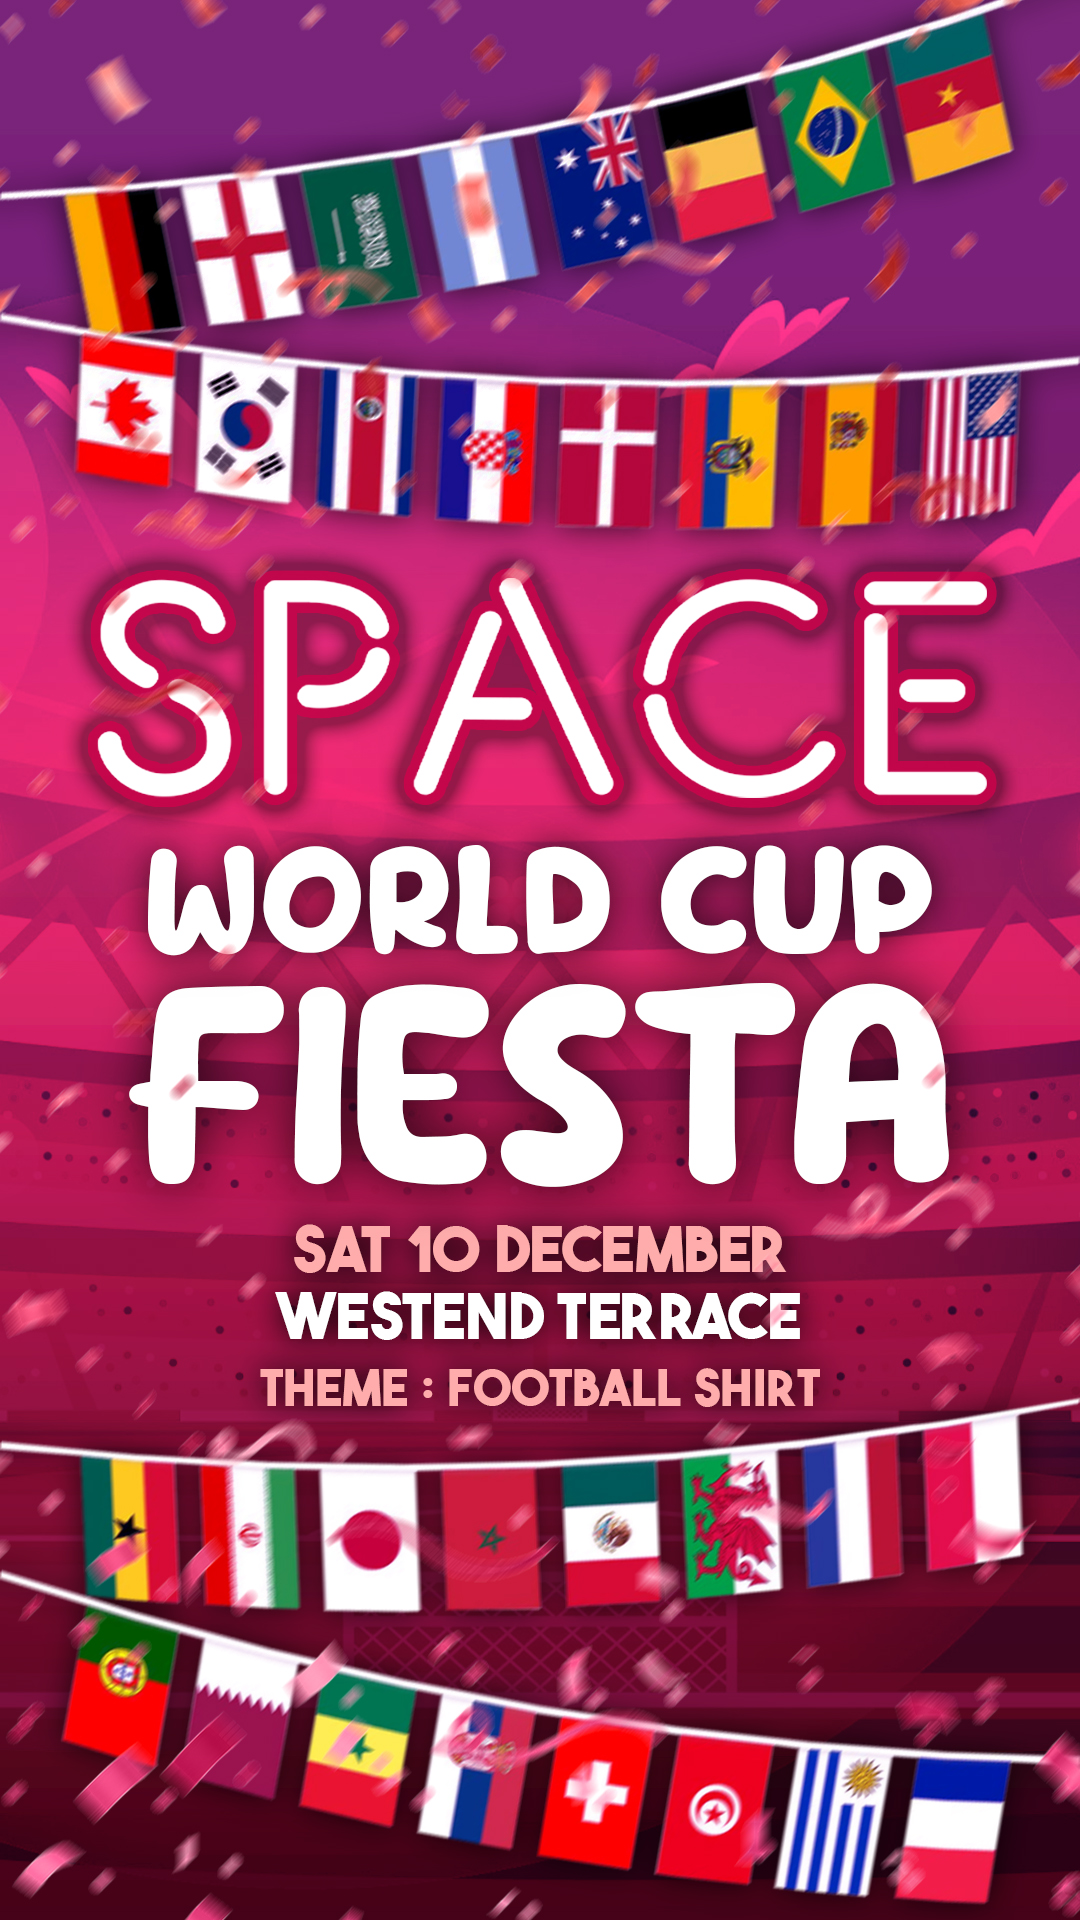 Space | World Cup Fiesta poster